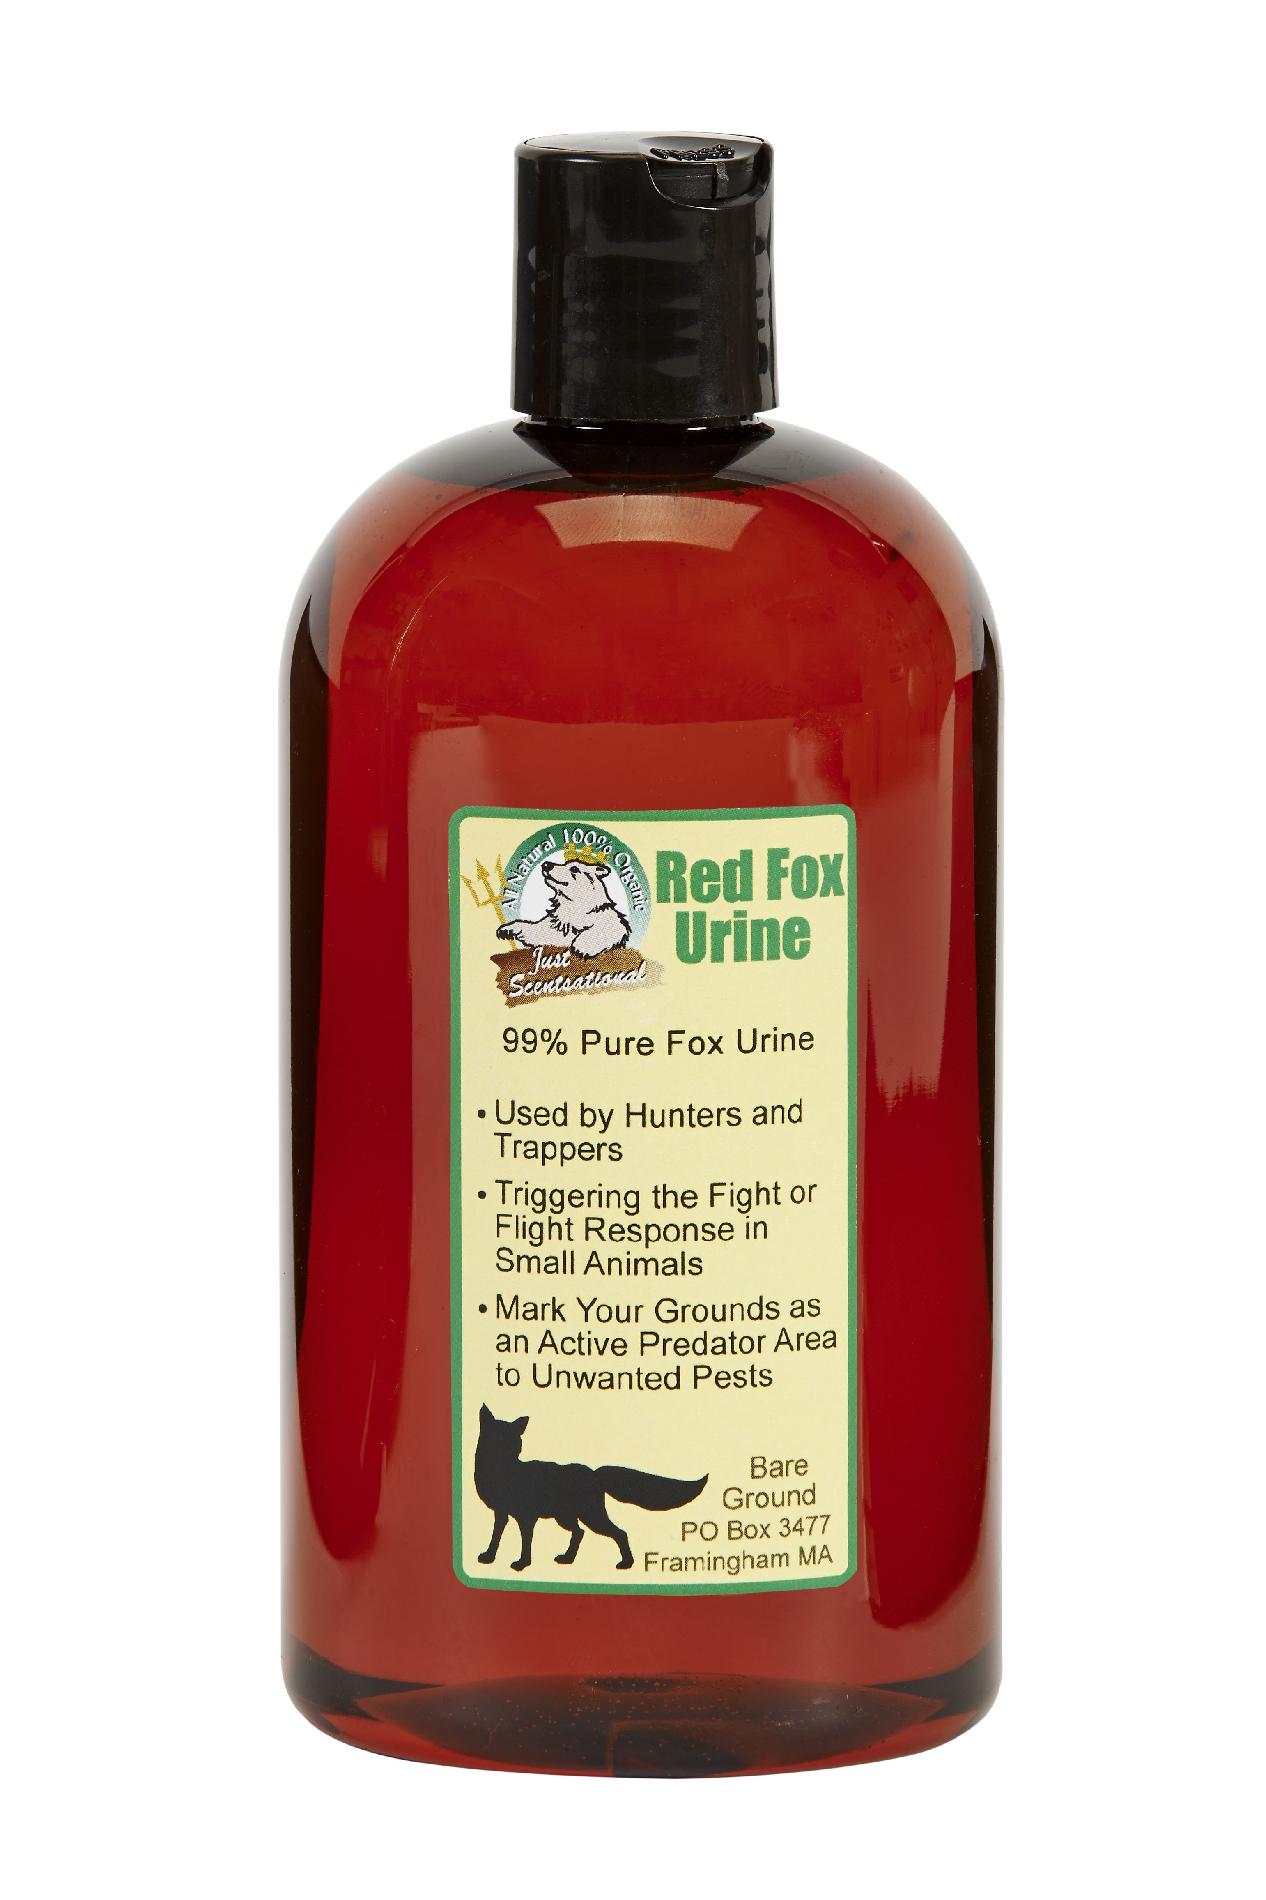 Just Scentsational 16 oz bottle of pure 100% meat fed red fox urine